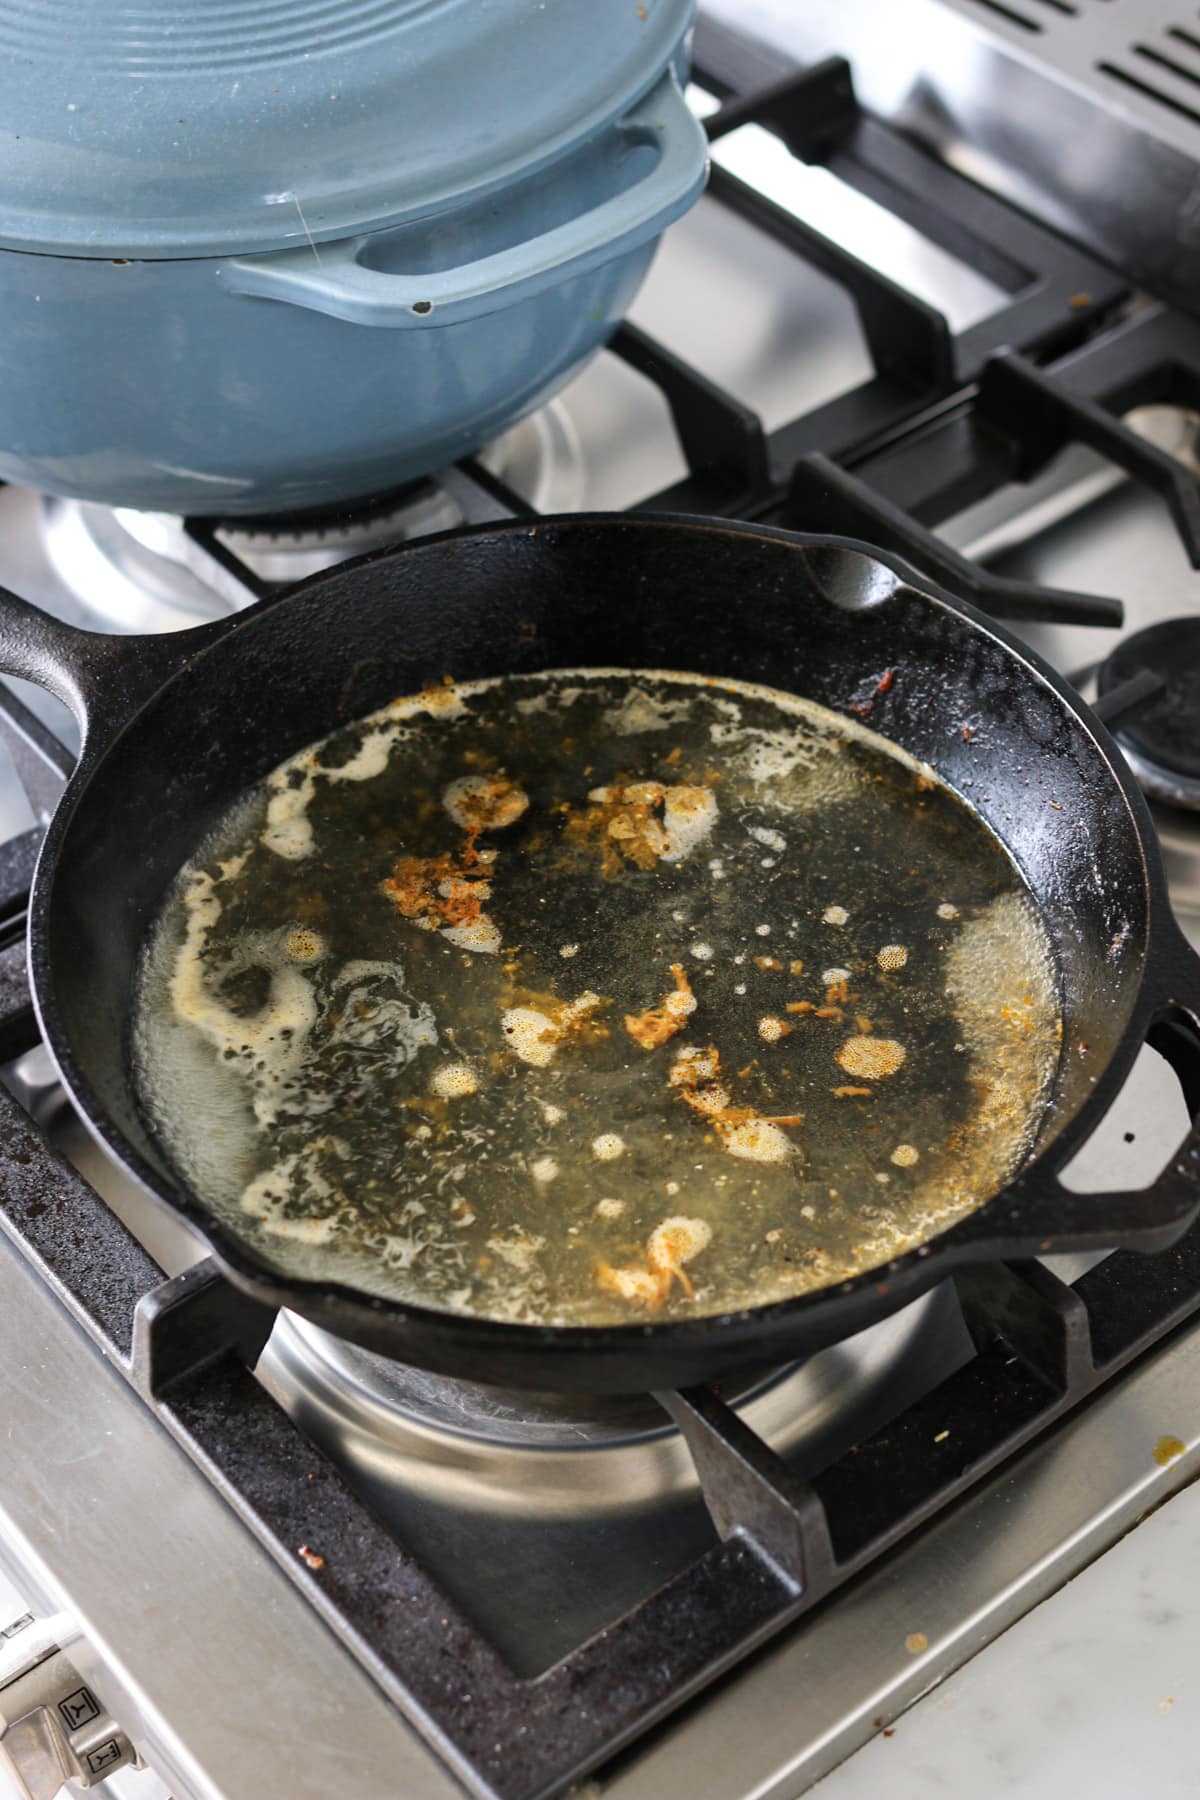 Cleaning a heavily soiled cast iron pan in boiling water